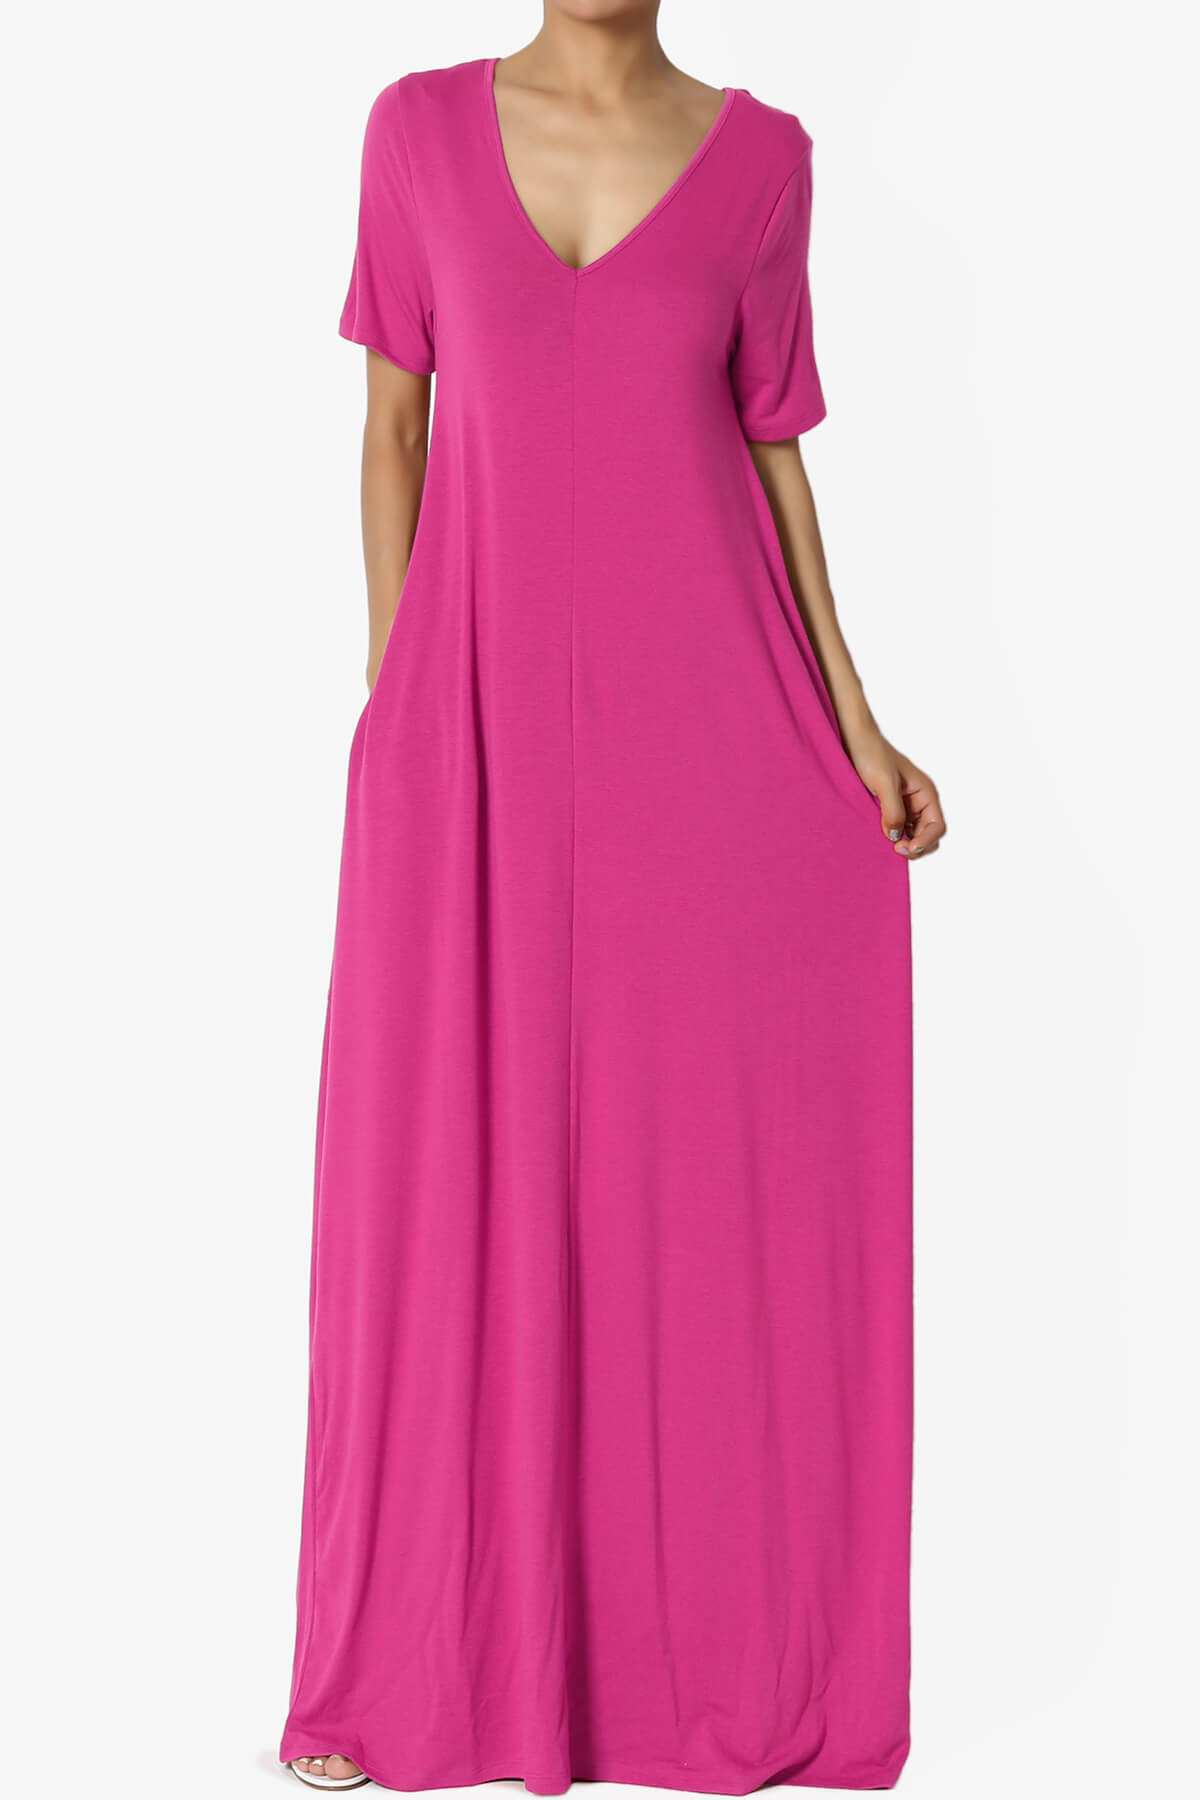 Load image into Gallery viewer, Vina Pocket Oversized Maxi Dress HOT PINK_1
